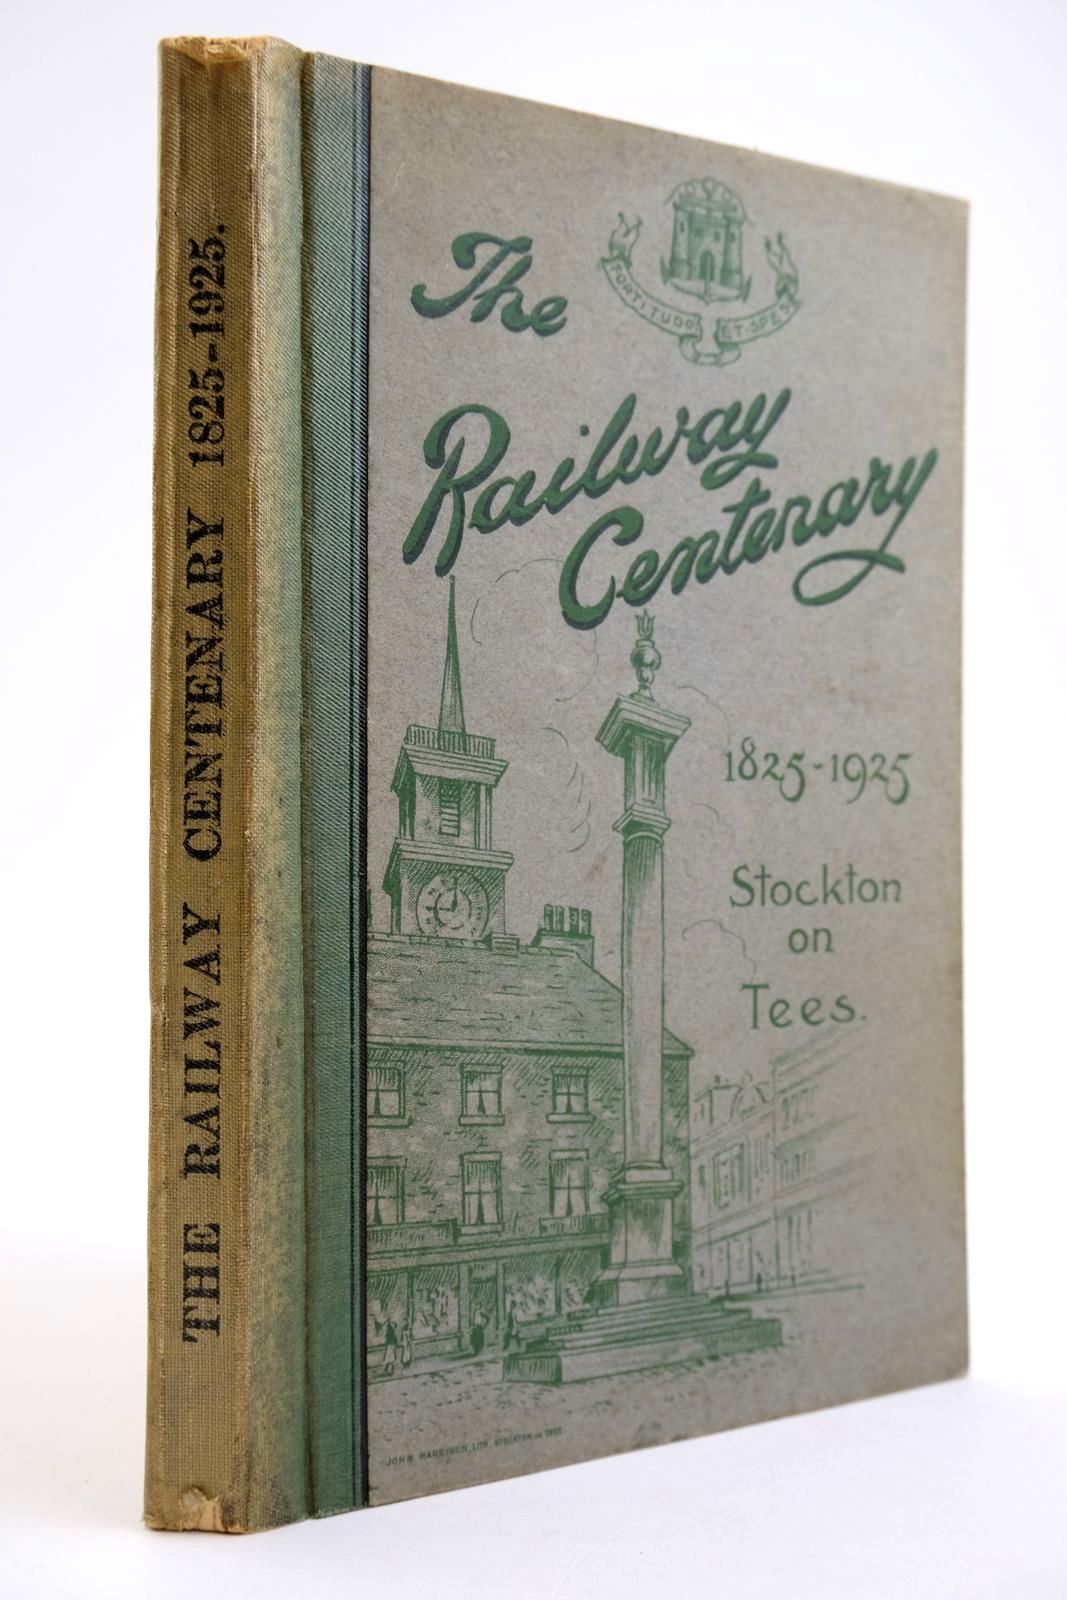 Photo of THE CENTENARY OF PUBLIC RAILWAYS published by The Stockton-On-Tees Railway Centenary Committee (STOCK CODE: 2133597)  for sale by Stella & Rose's Books